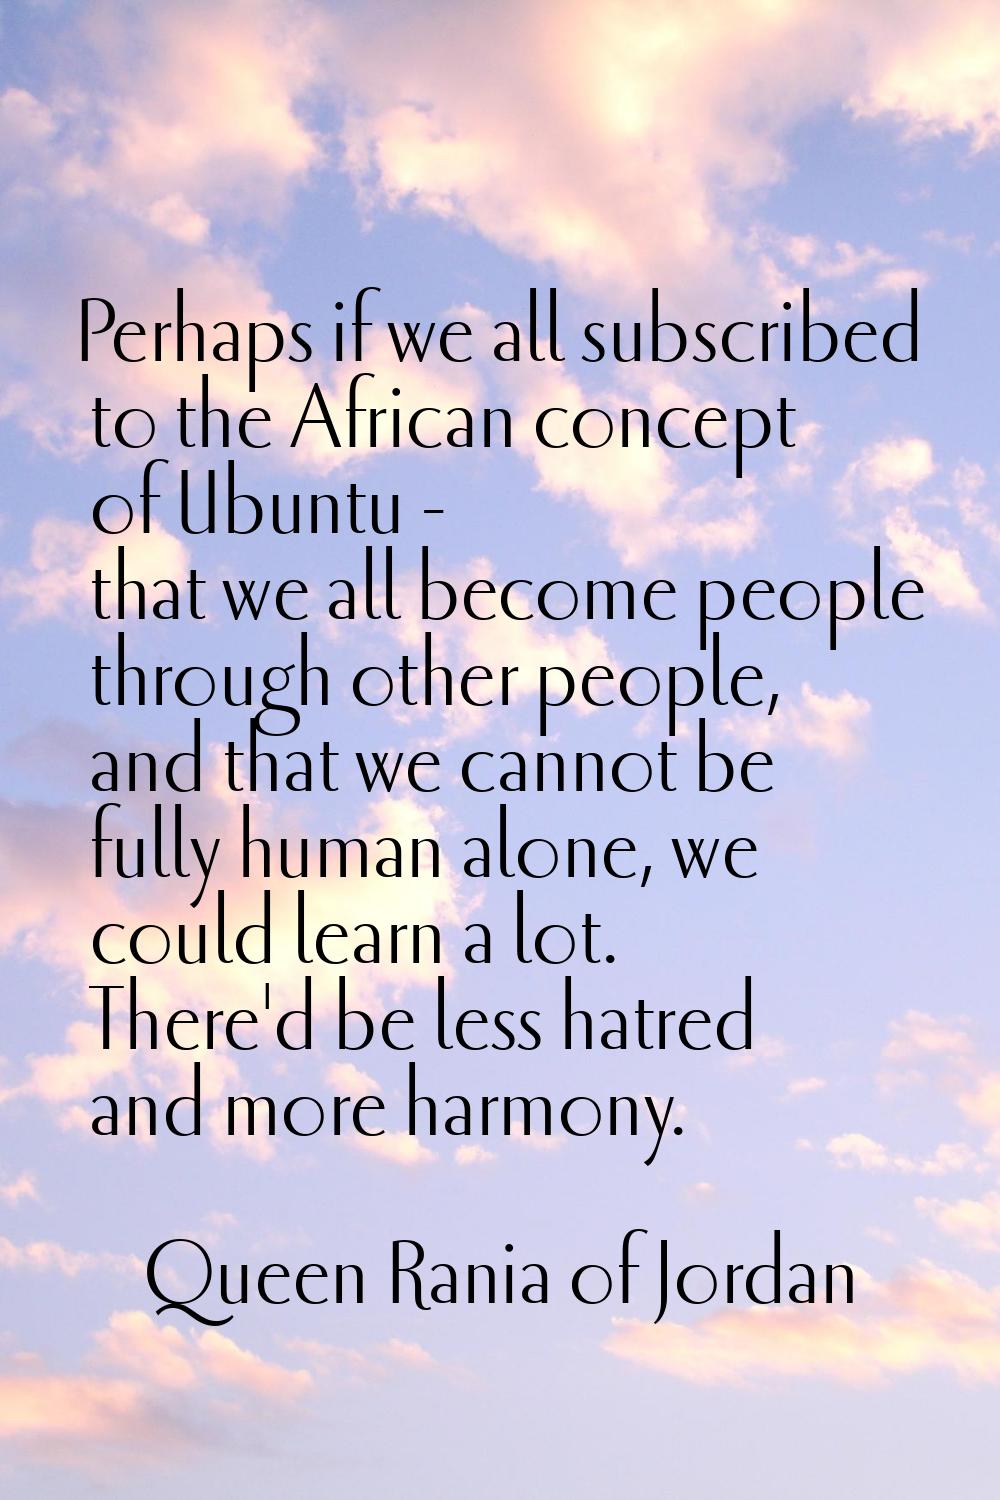 Perhaps if we all subscribed to the African concept of Ubuntu - that we all become people through o